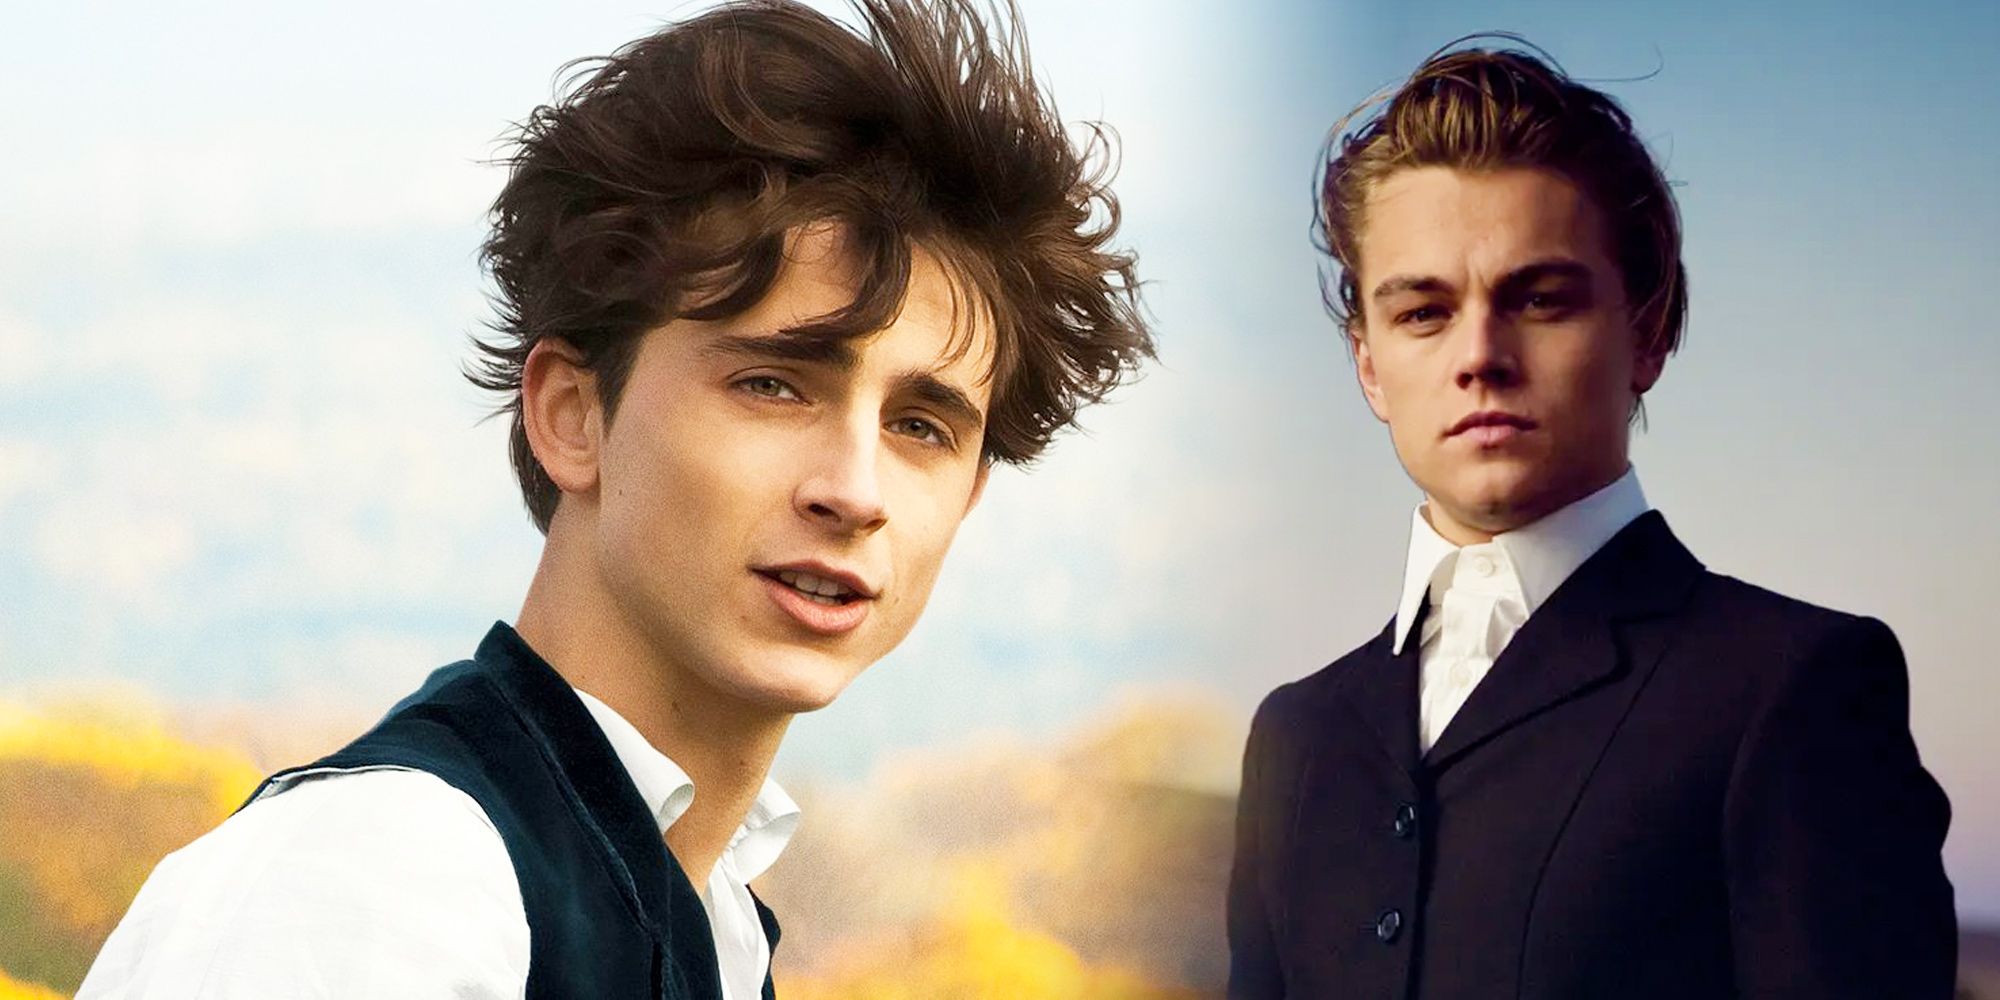 Why Timothee Chalamet Is The Next Leonardo DiCaprio